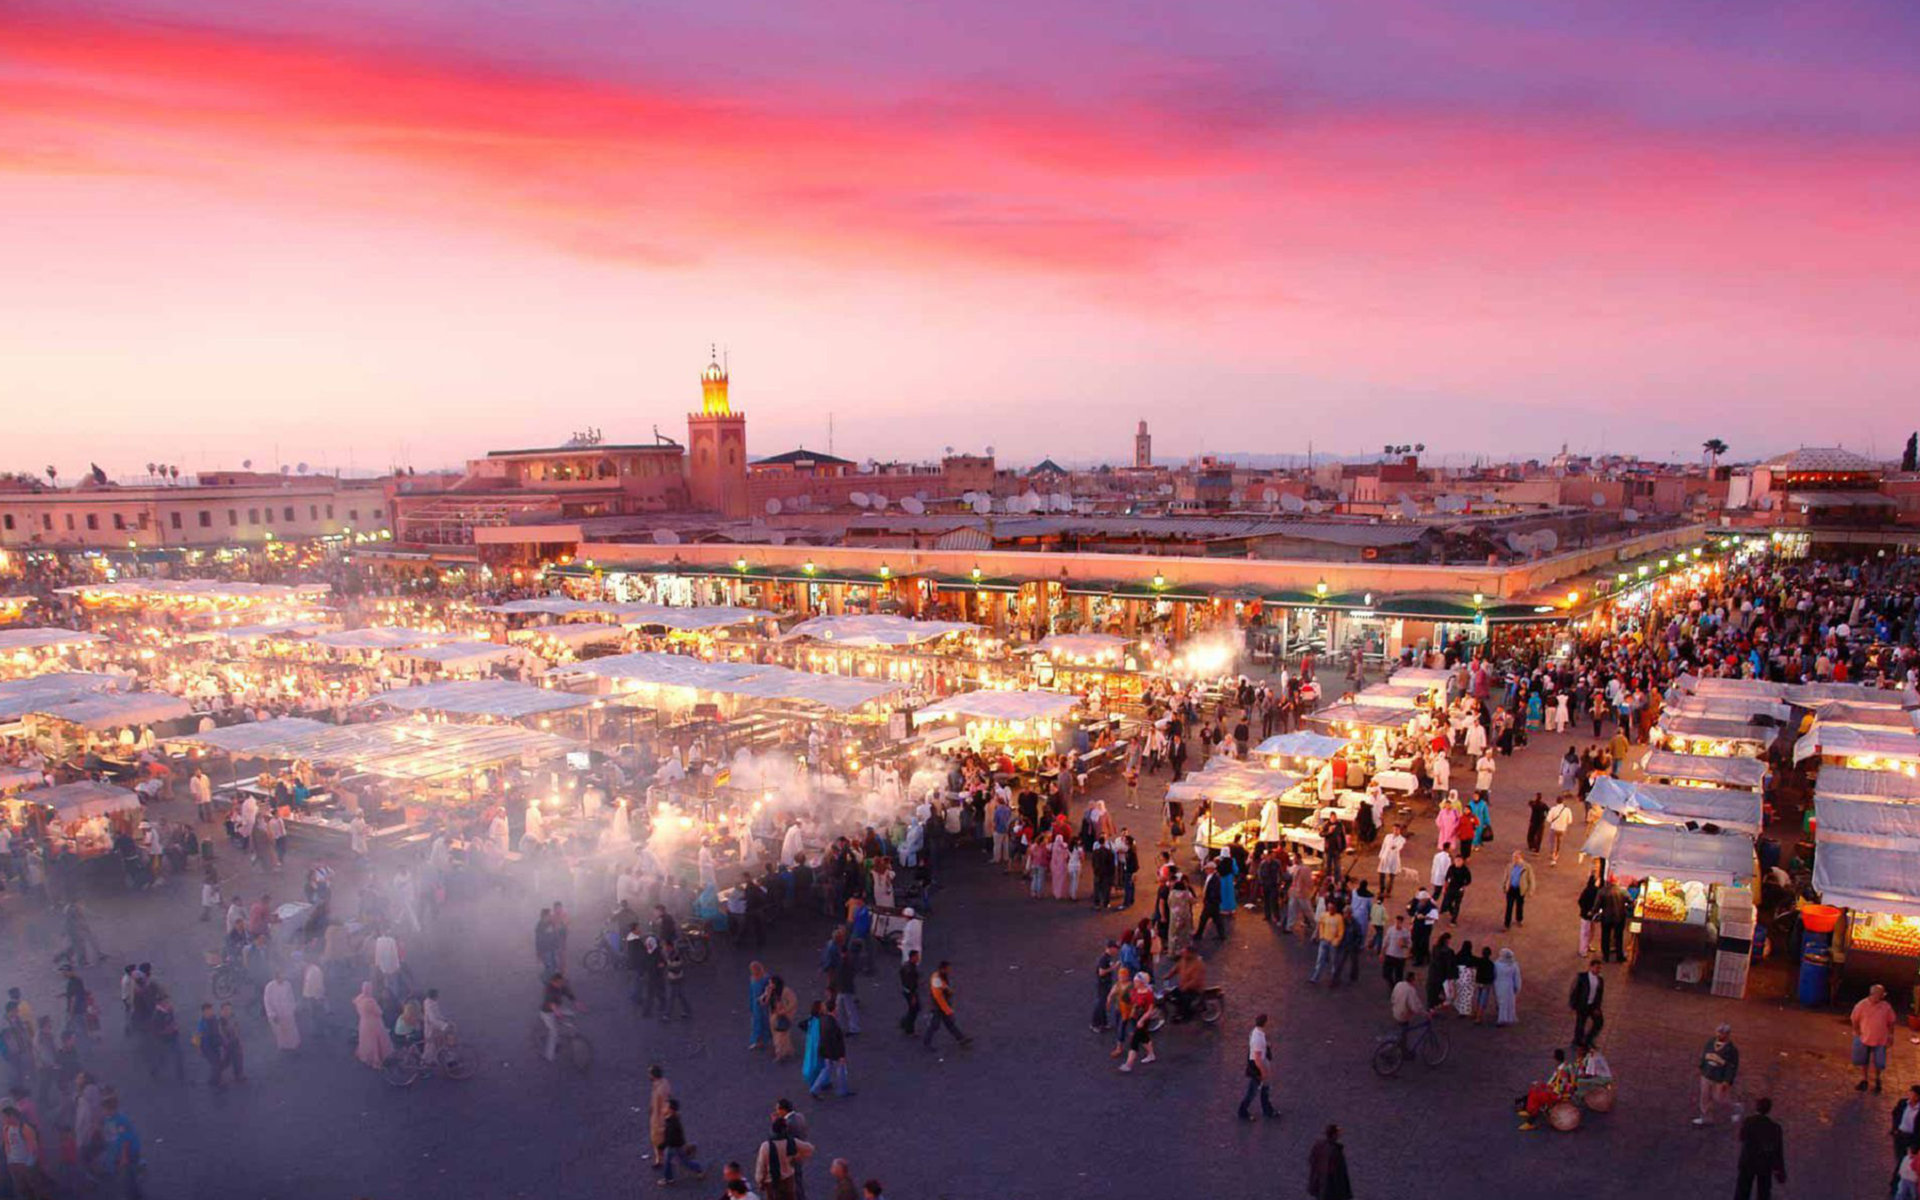 Private 7 days tour from Casablanca to Marrakech and Merzouga via Chefchaouen